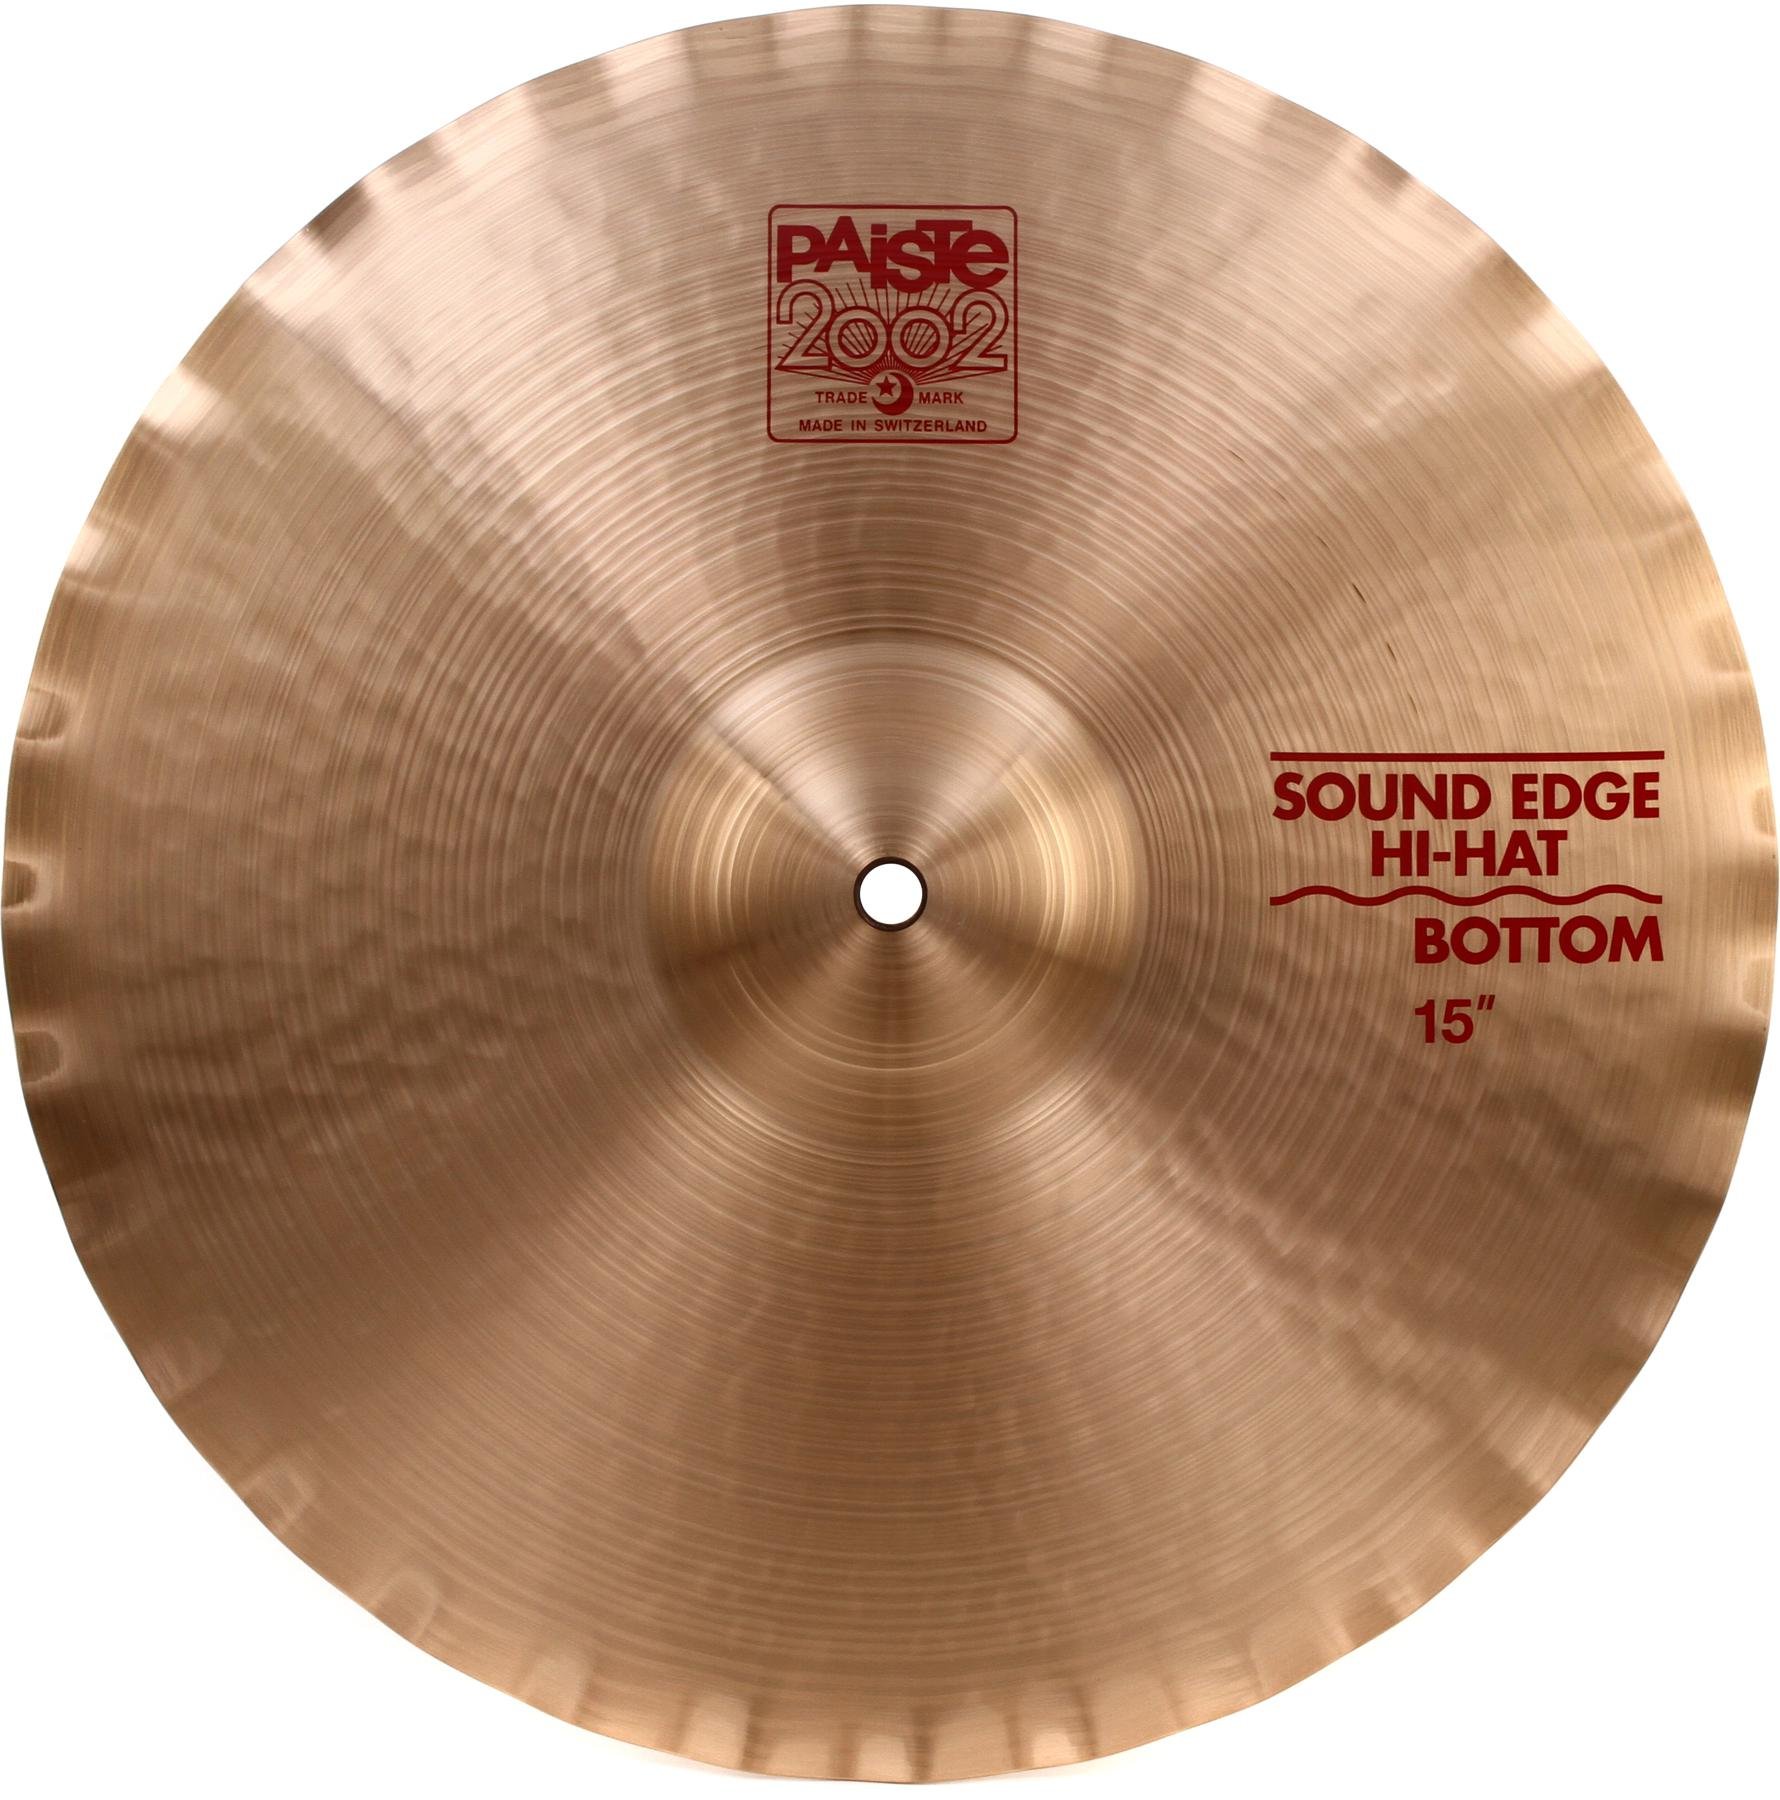 Paiste 15 inch 2002 Sound Edge Hi-hat Bottom Cymbal | Sweetwater